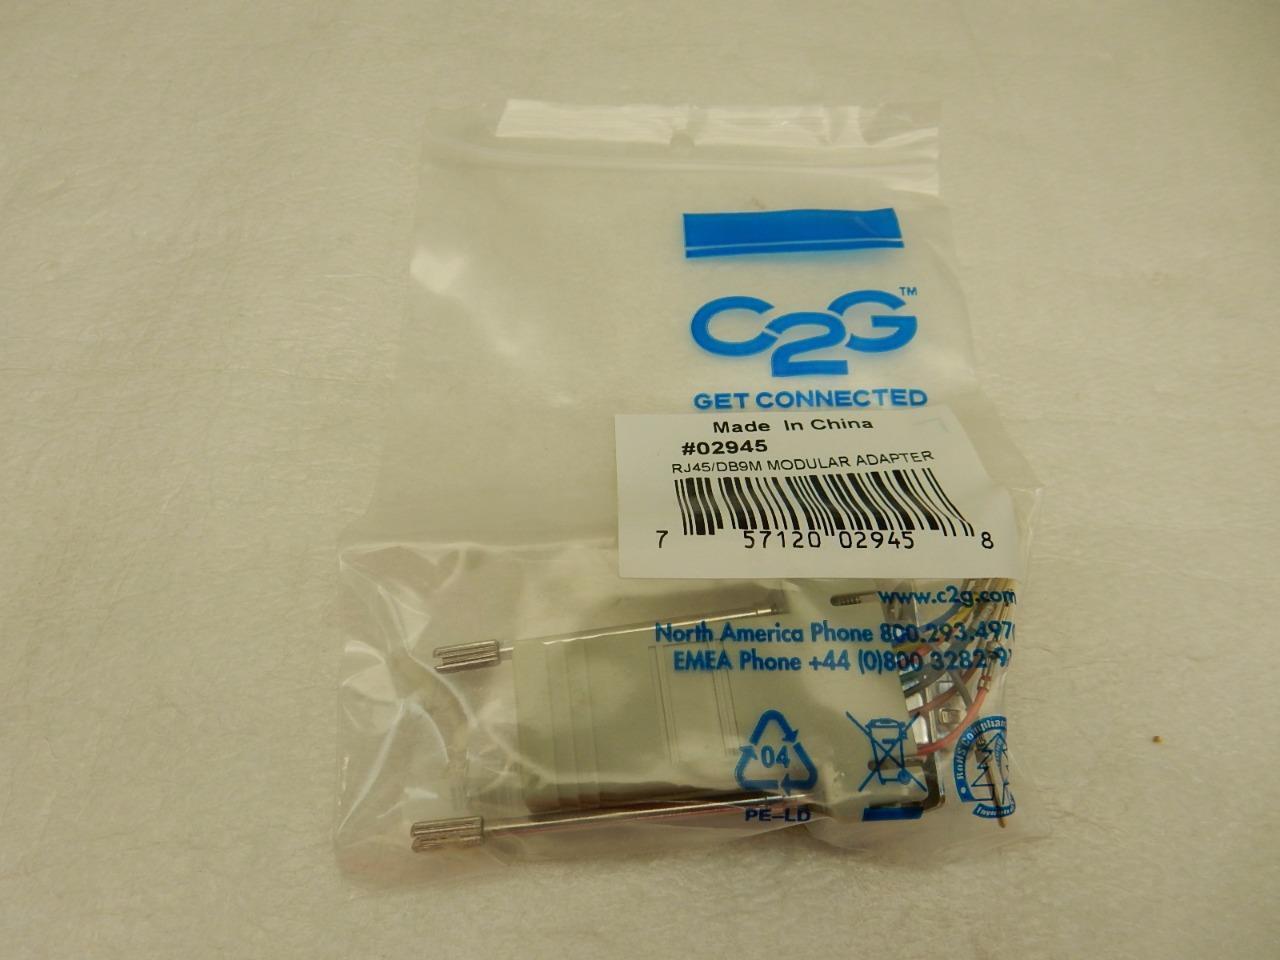 NEW C2G 02945 RJ45 to DB9 Male Serial RS232 Modular Adapter Gray 757120029458